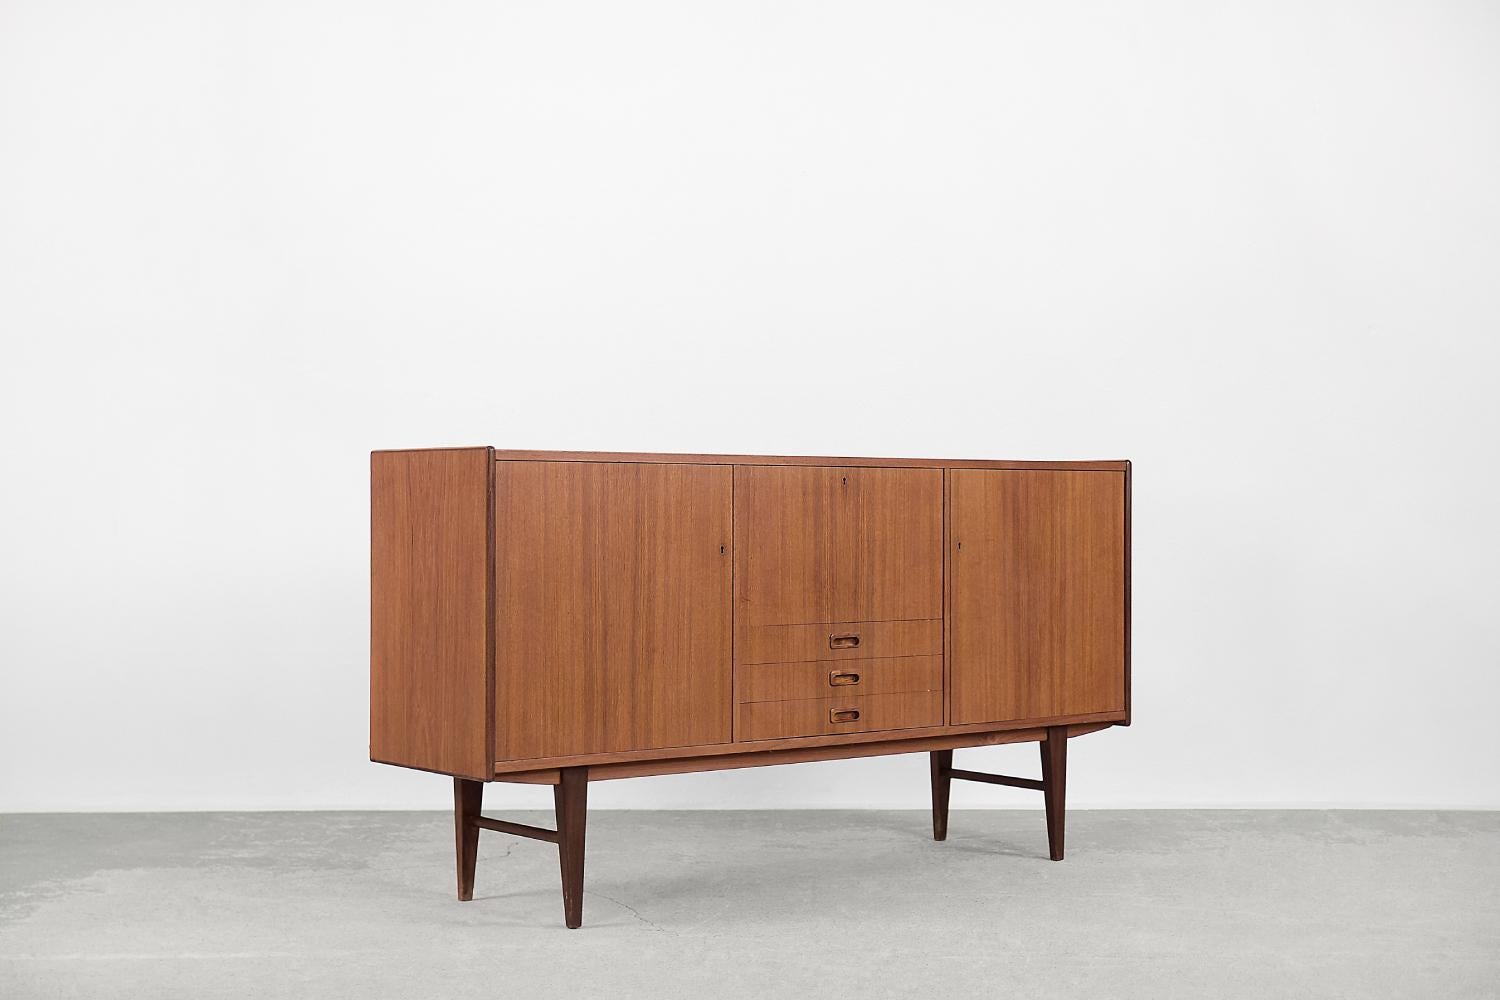 Vintage Scandinavian Modern Classic Teak Wood High Sideboard with Drawers, 1960s For Sale 1